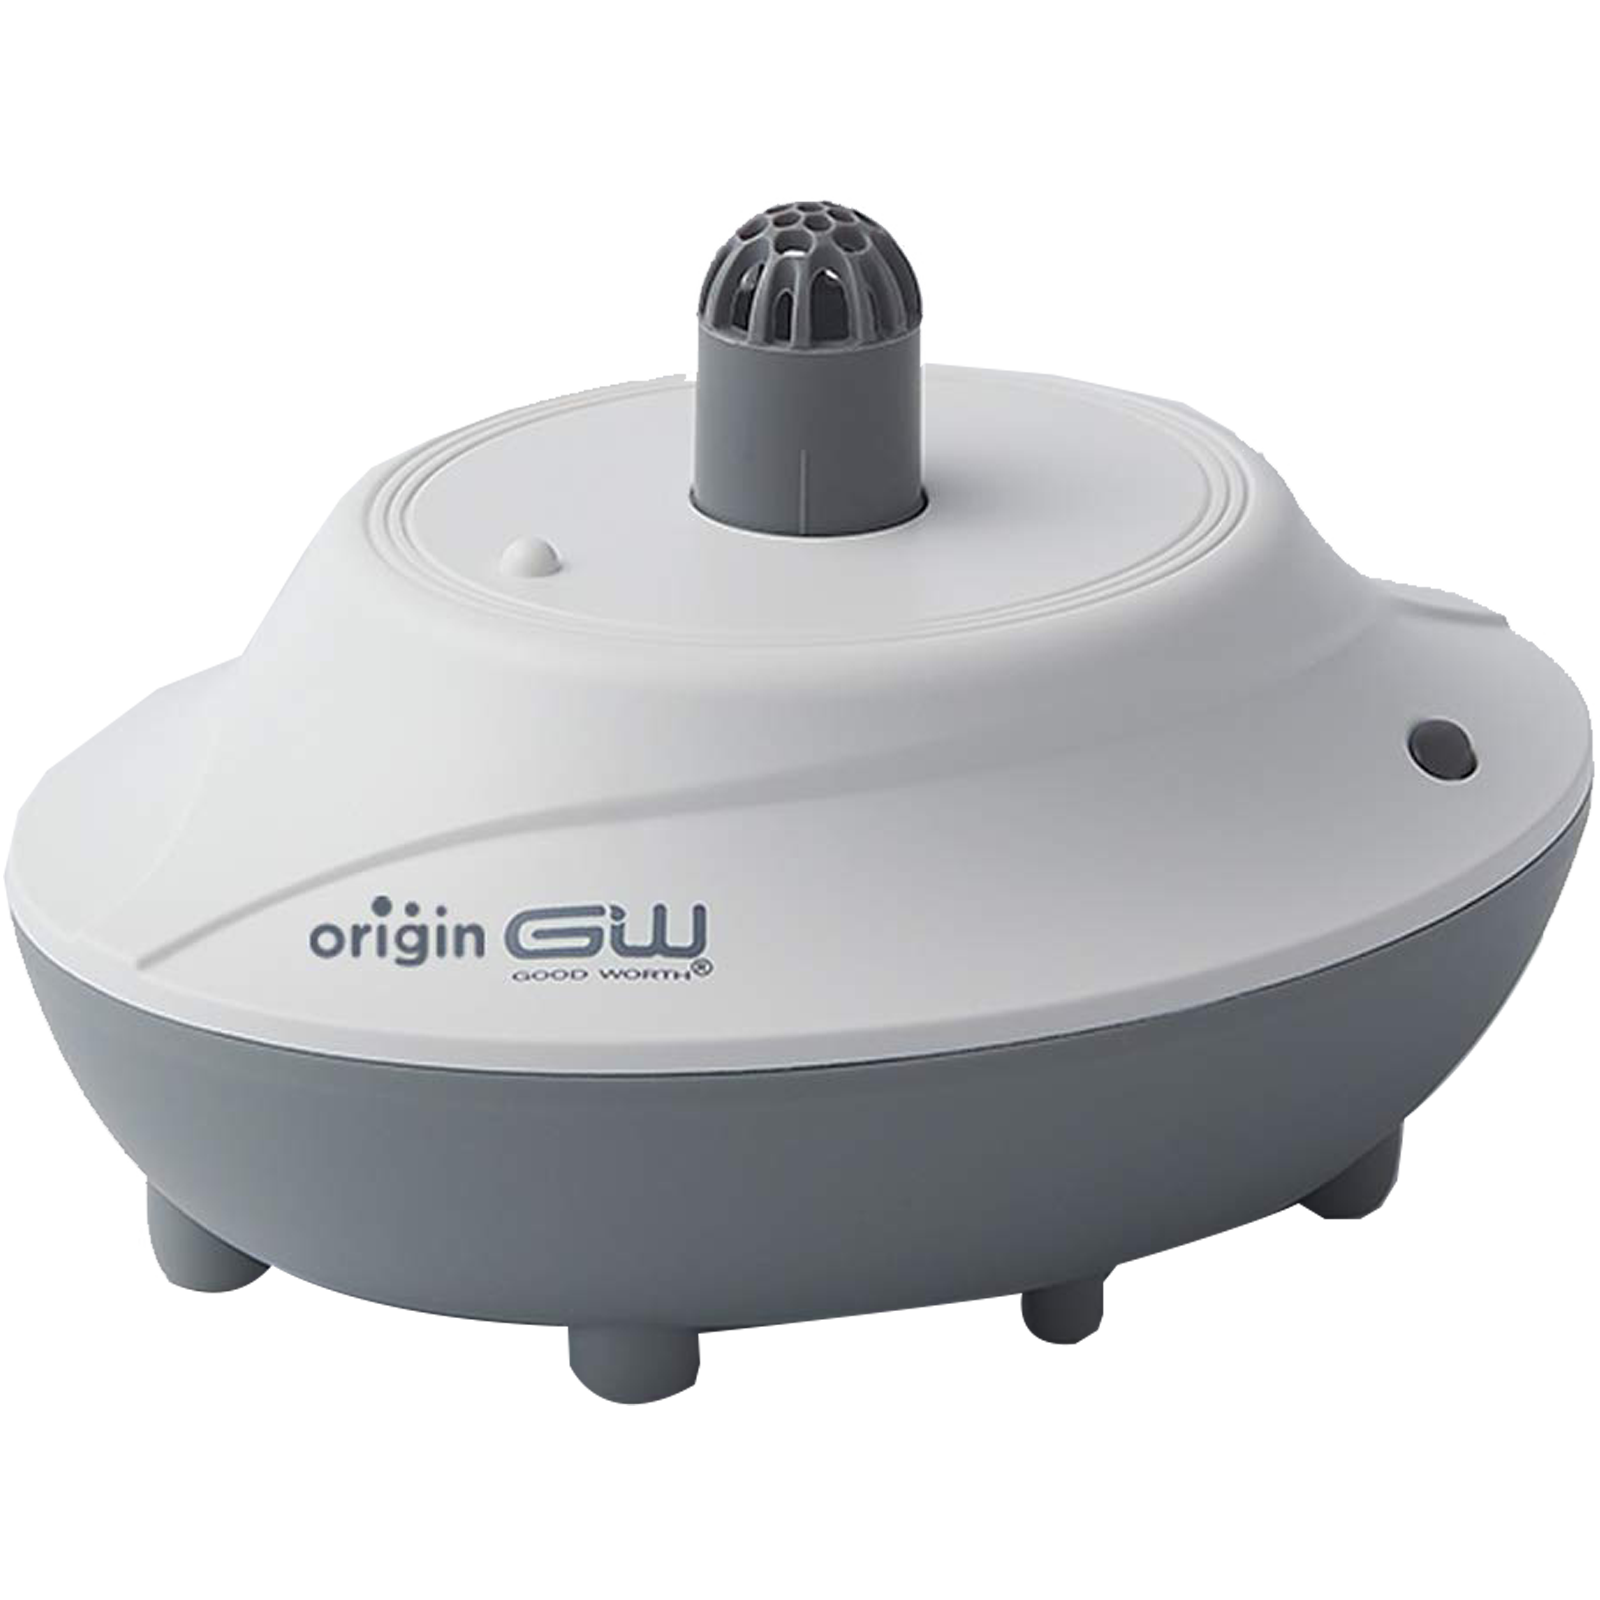 Origin Recharging Base Charger/Charging Dock for Dehumidifier (ORB1, White)